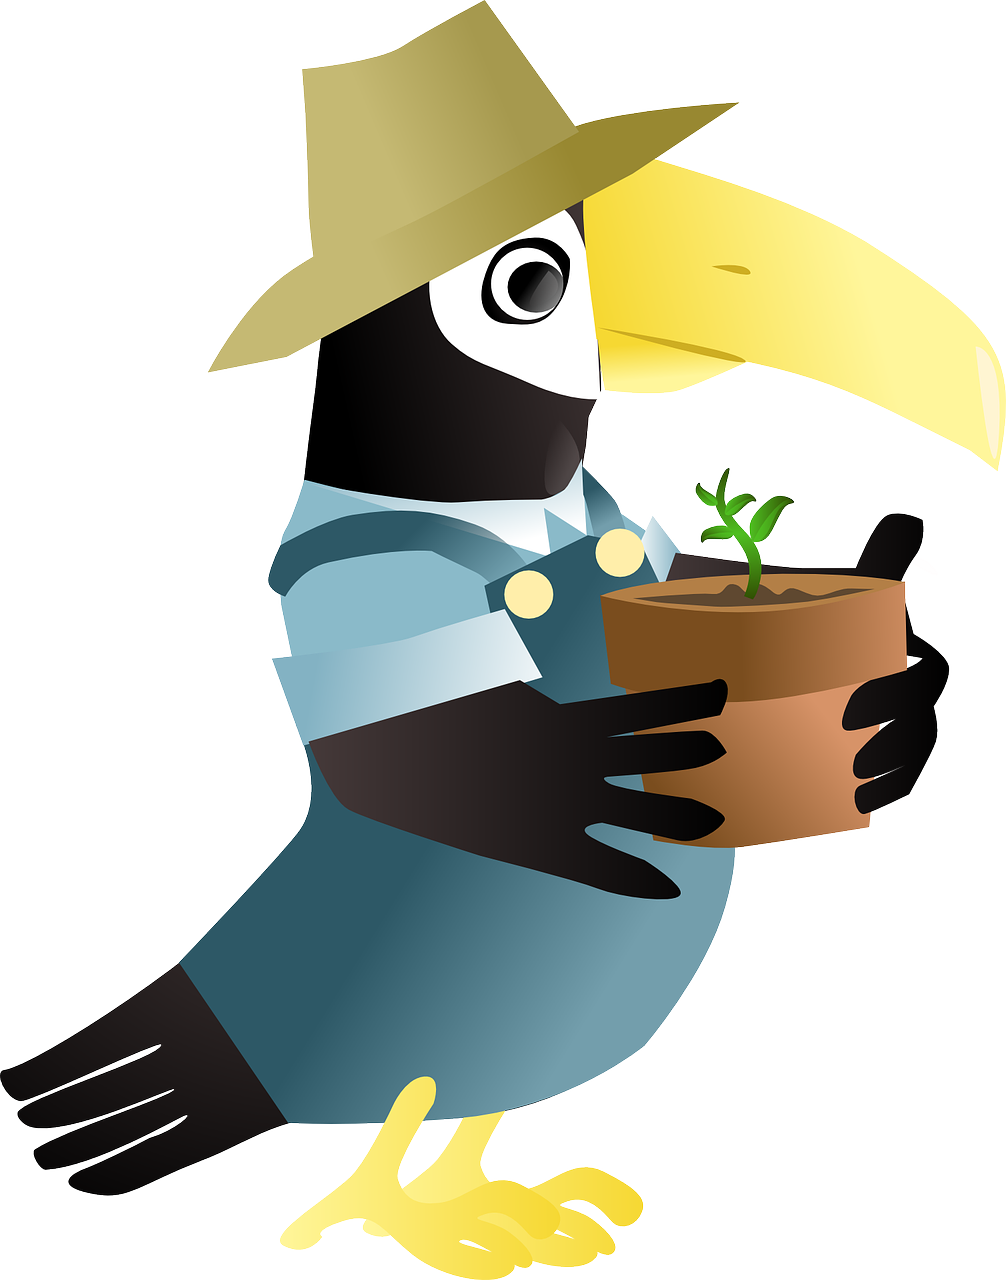 Jungle clipart toucan. Free image on pixabay